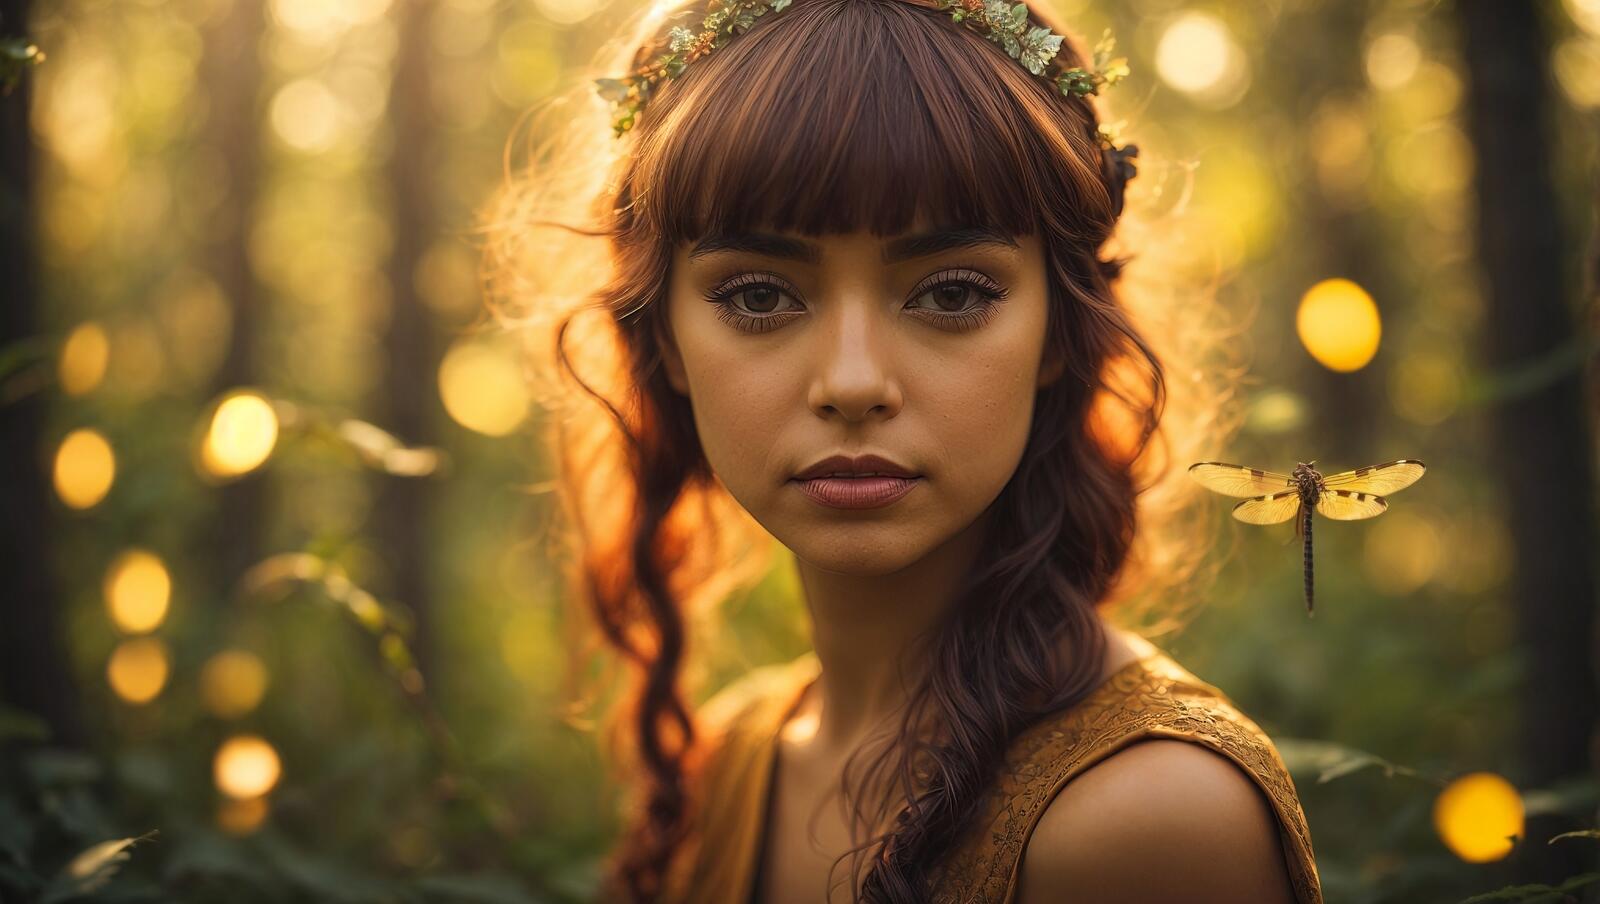 Free photo A beautiful young woman with long hair wearing a wreath in the woods